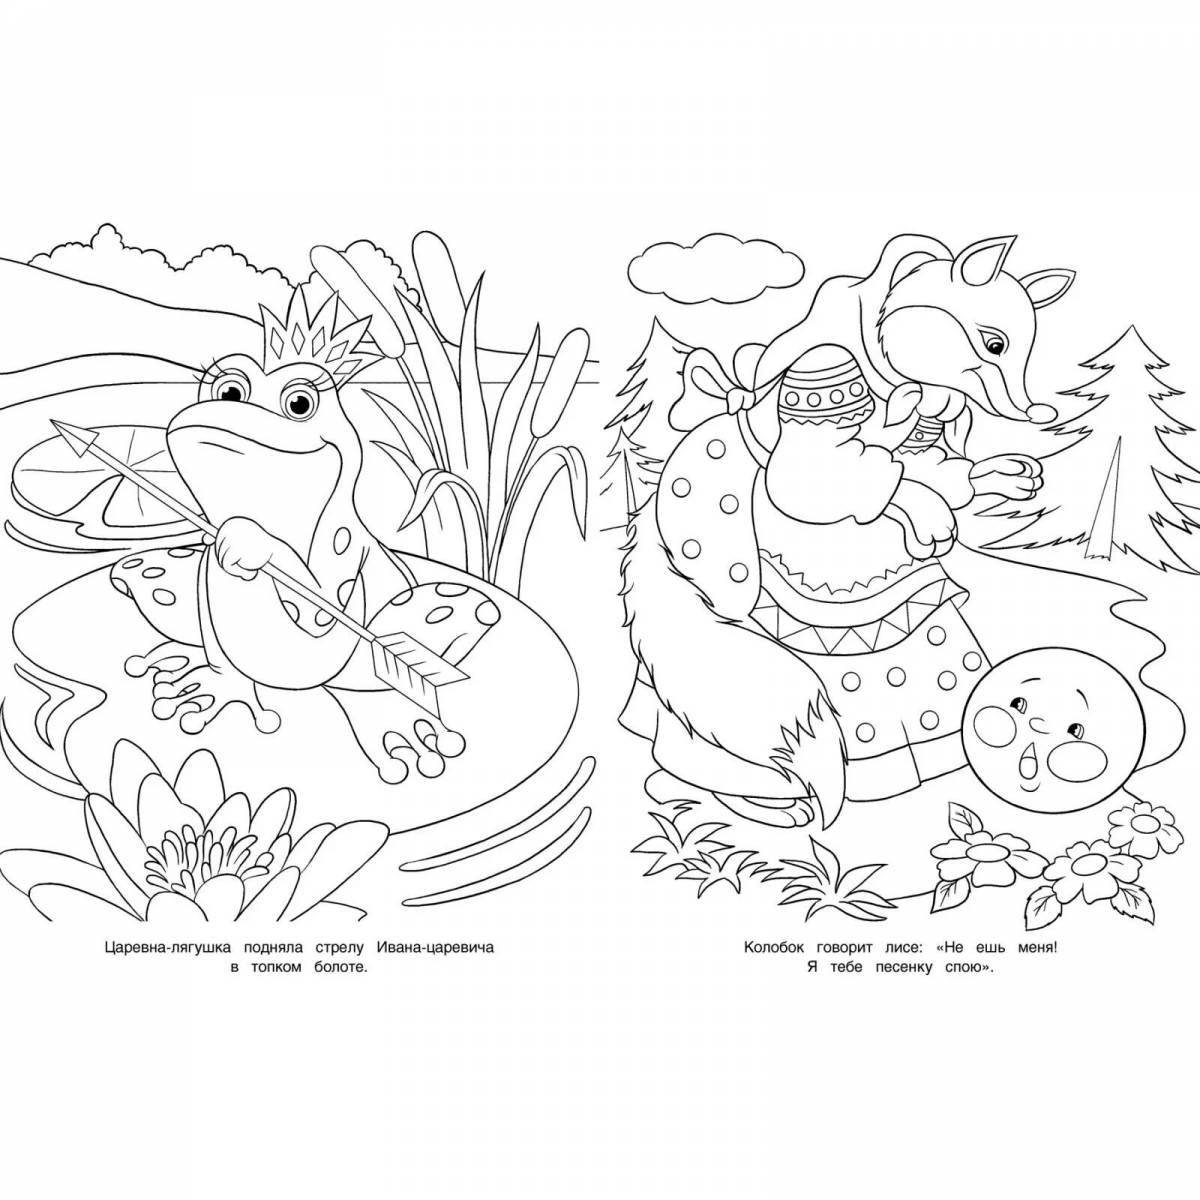 Fun coloring book based on fairy tales senior group